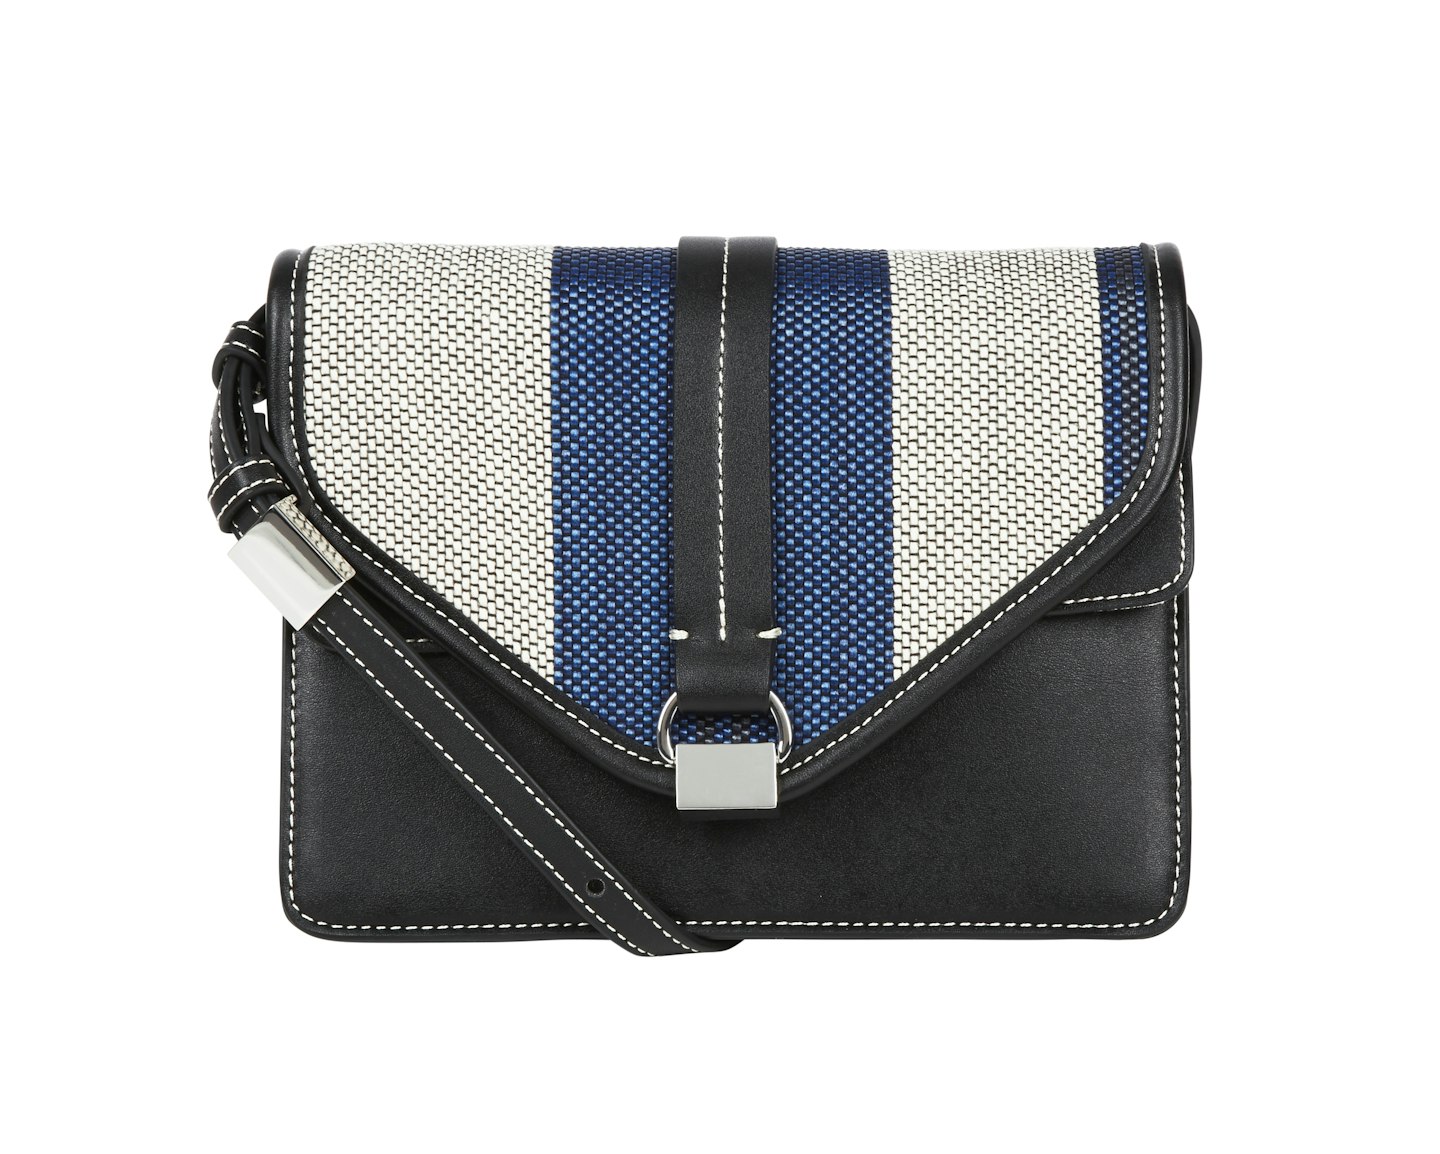 Holly Willoughby M&S Contrast cross body bag, 29.50